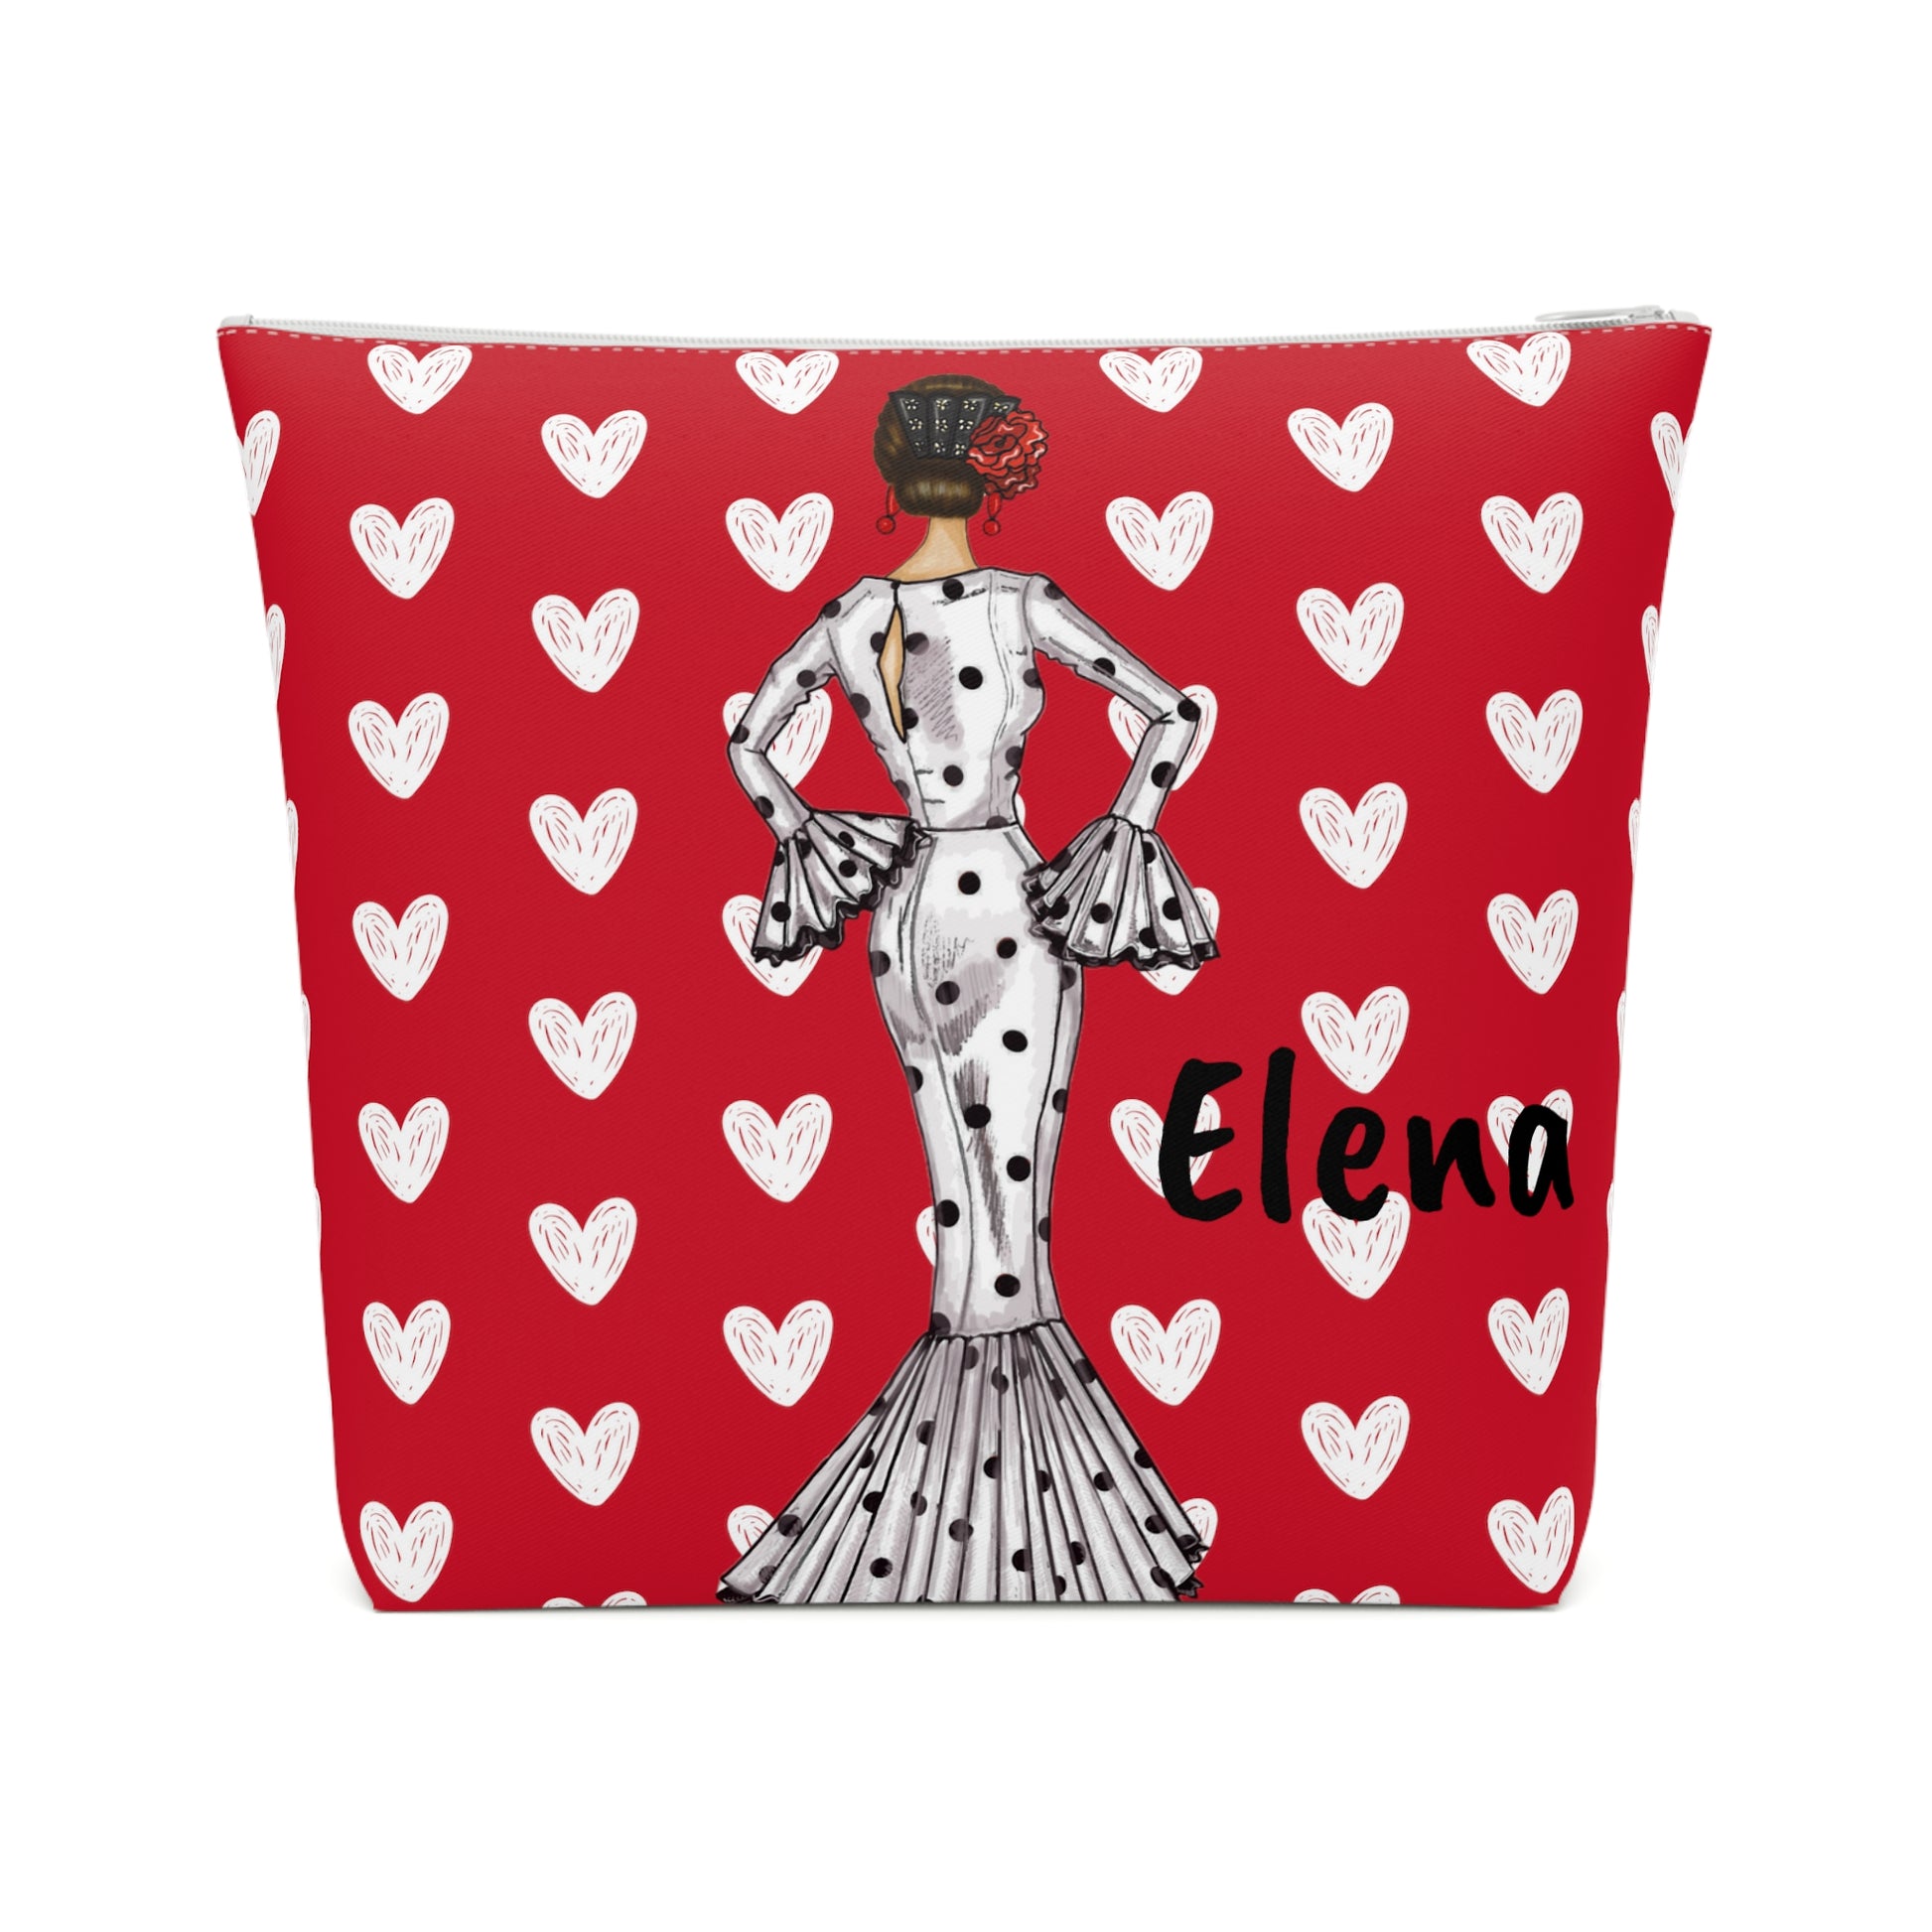 a red cosmetic bag with a dalmatian doll on it